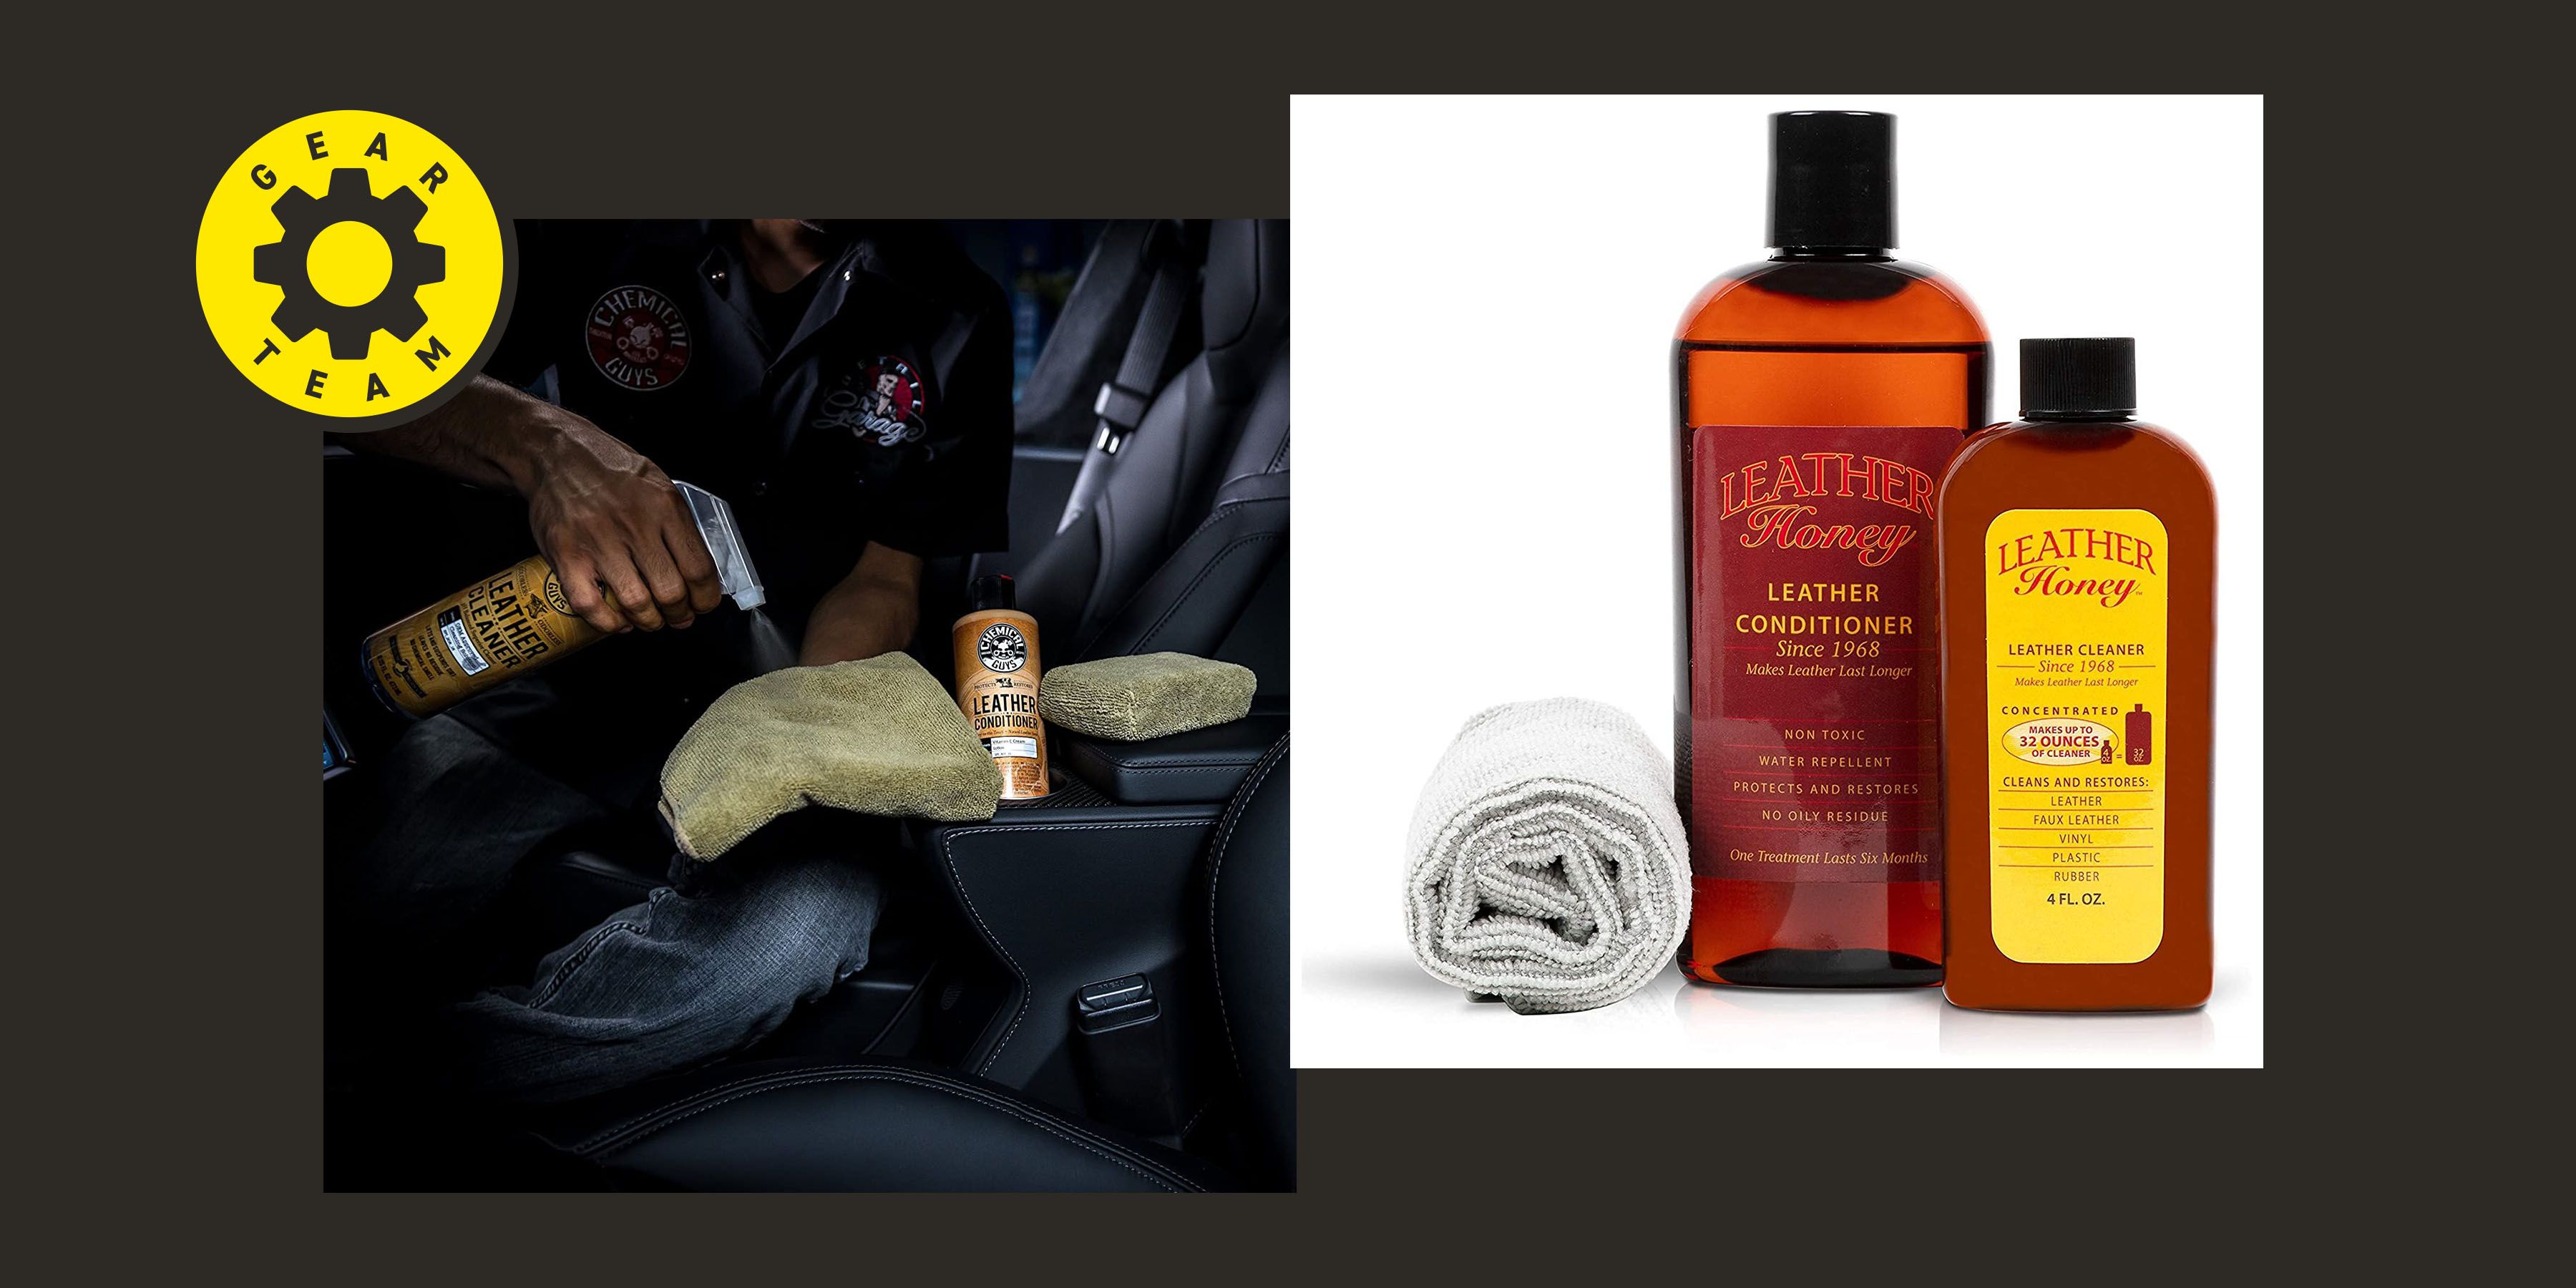 Apple Brand Leather Care Kit 4 oz Cleaner & 4 oz Conditioner +